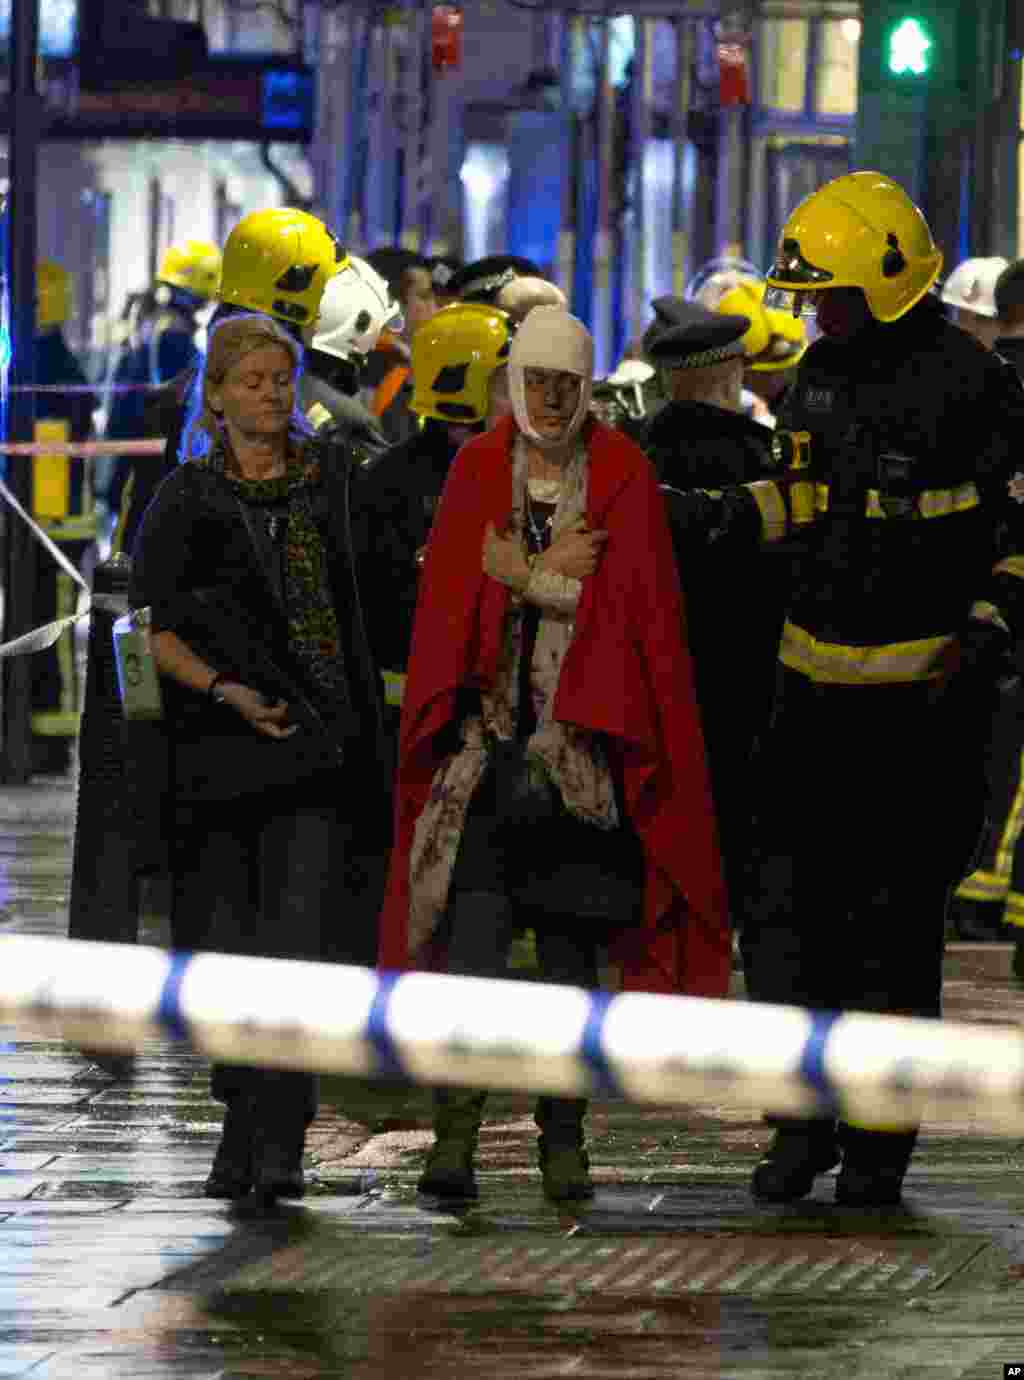 A woman walks, bandaged and wearing a blanket given by emergency services, following the partial collapse of the ceiling at the Apollo Theatre during a performance at the height of the Christmas season, Shaftesbury Avenue, central London, Dec. 19, 2013.